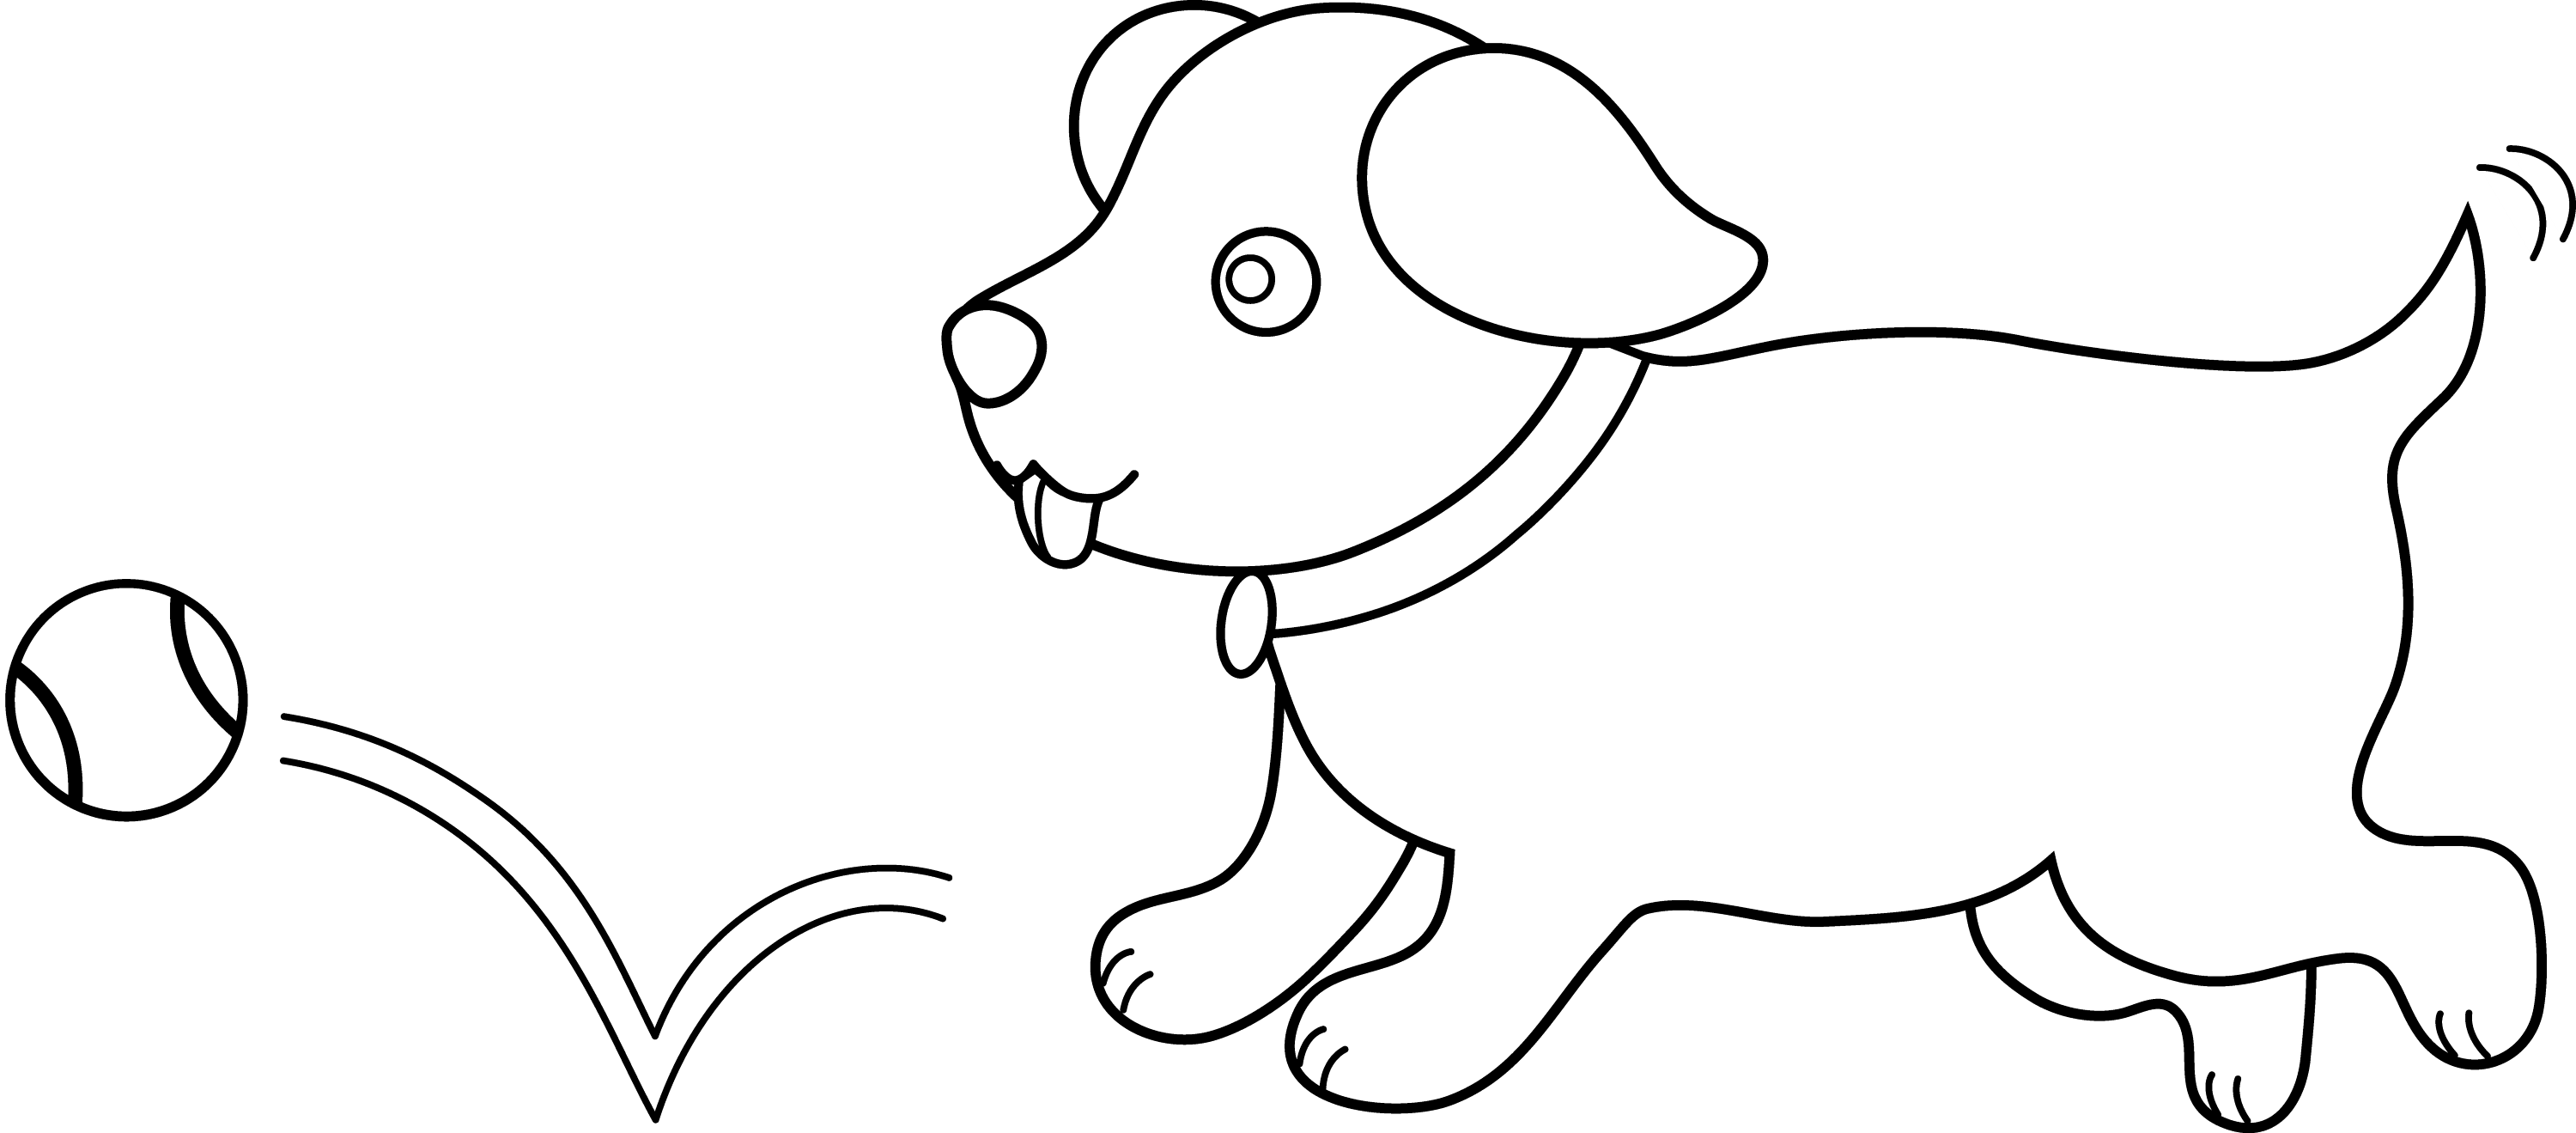 clipart dog outline - photo #25